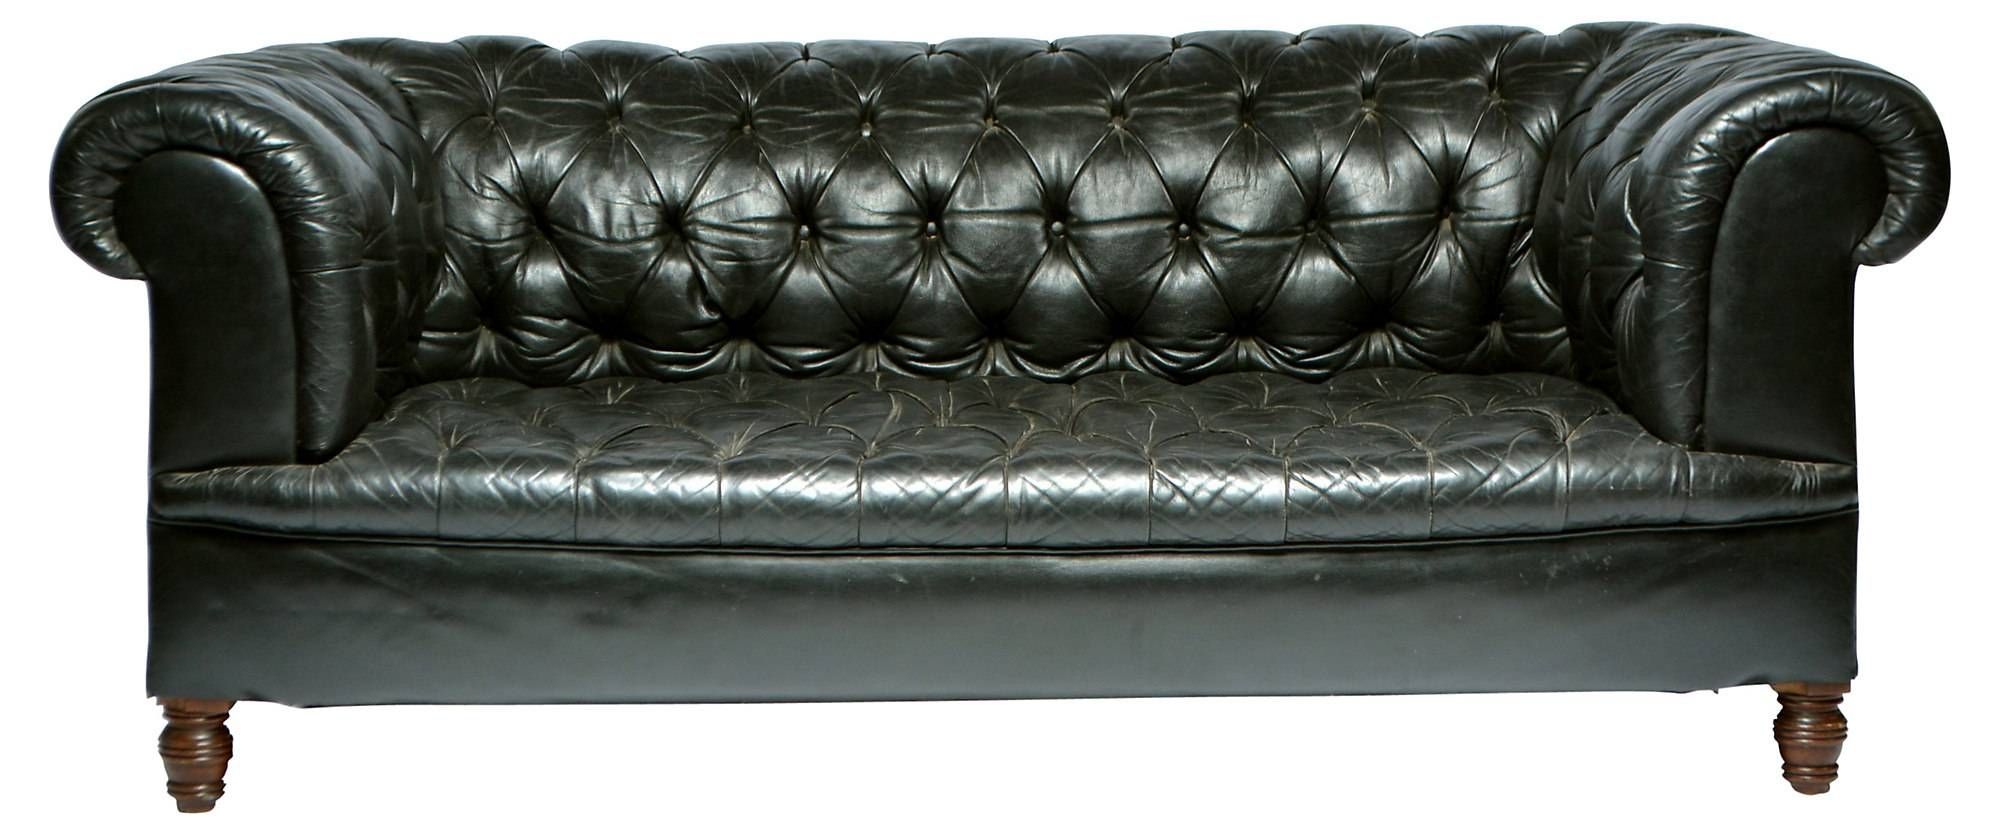 Antique Black Tufted Chesterfield Sofa – Mecox Gardens Within Chesterfield Black Sofas (View 27 of 30)